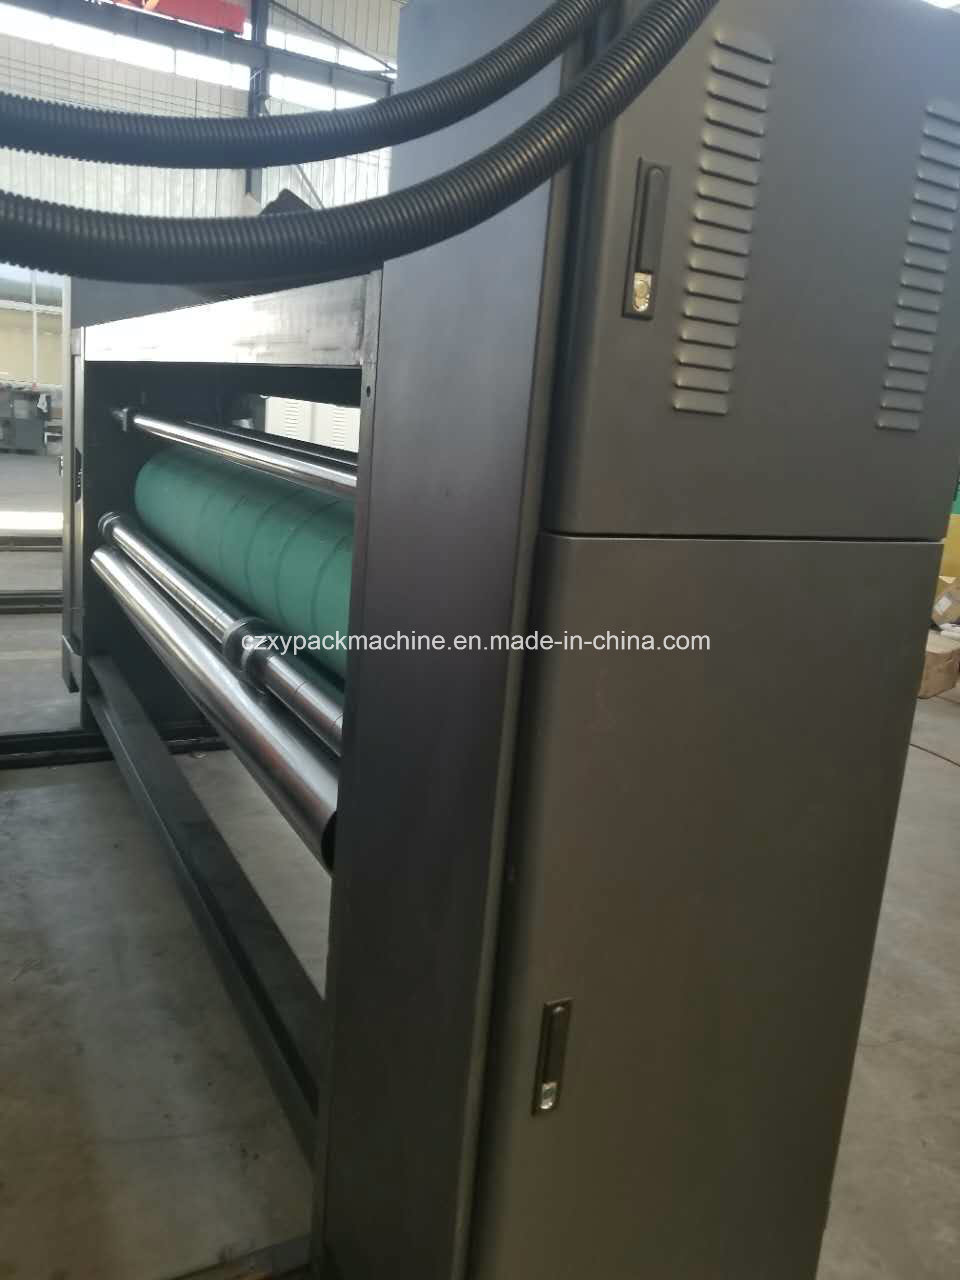 3color Carton Box Printing Machine with Slotter and Die Cutter